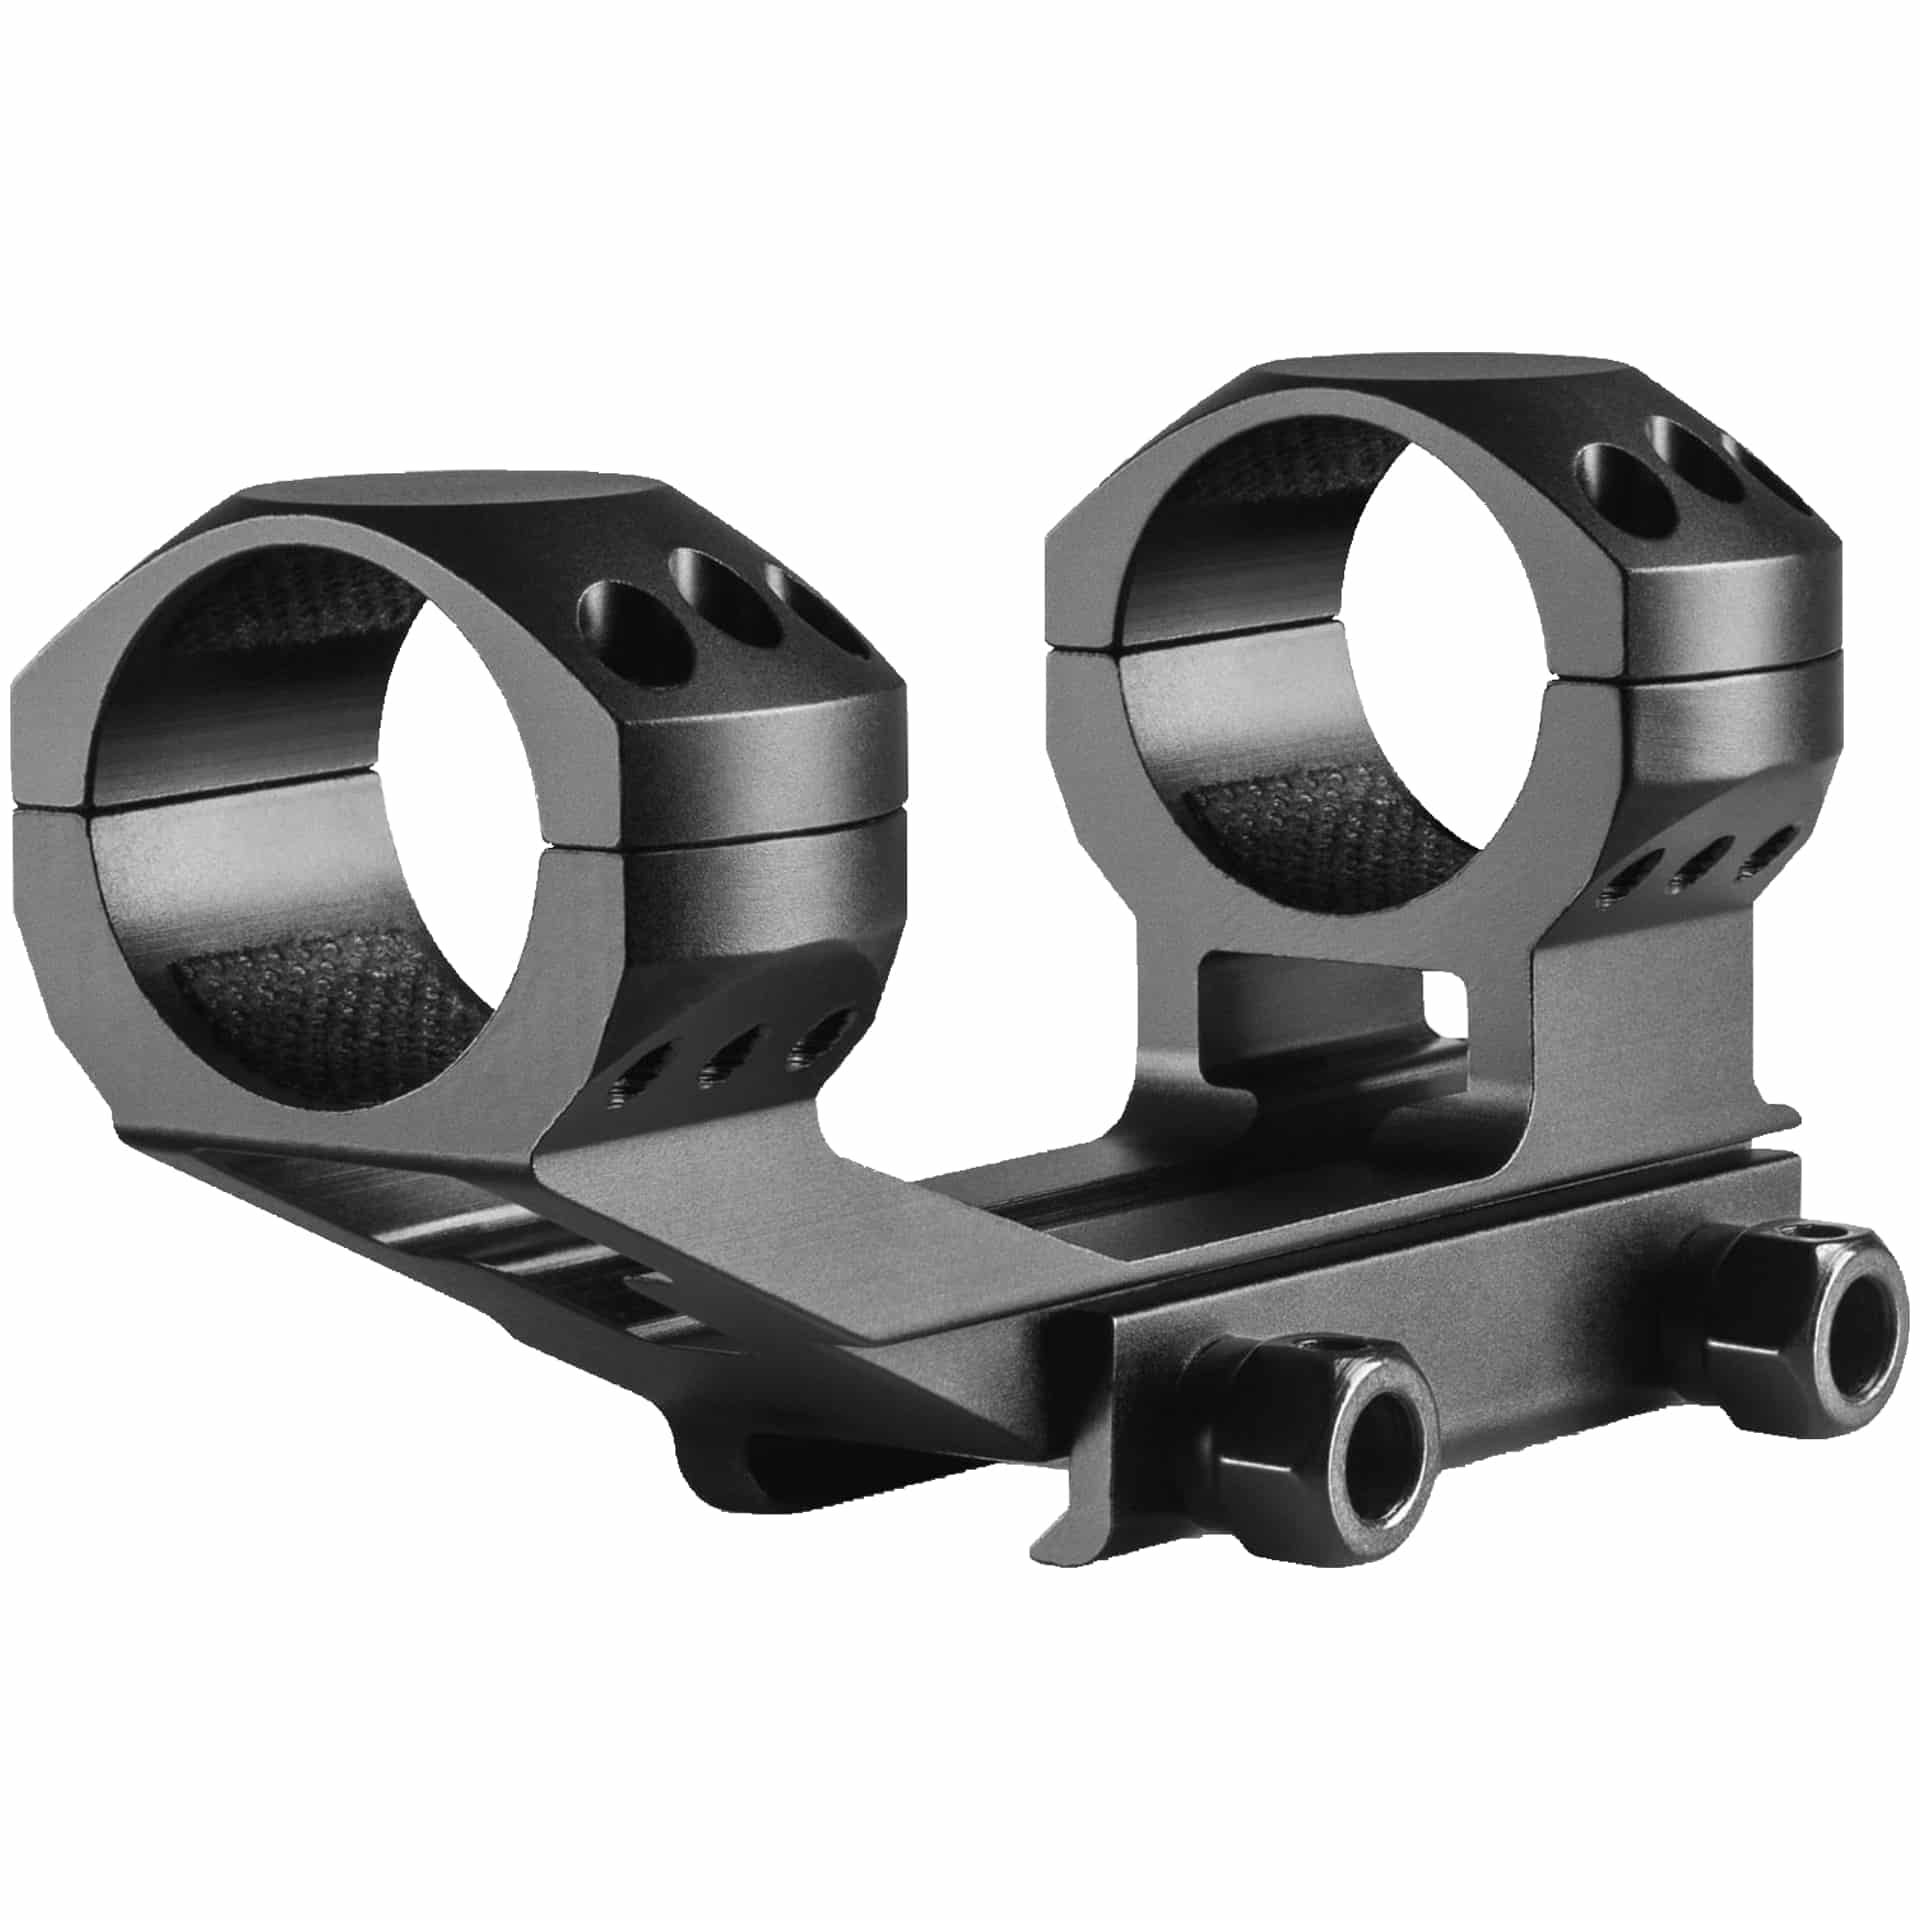 Tactical Cantilever Mount 30mm, High, 1 piece